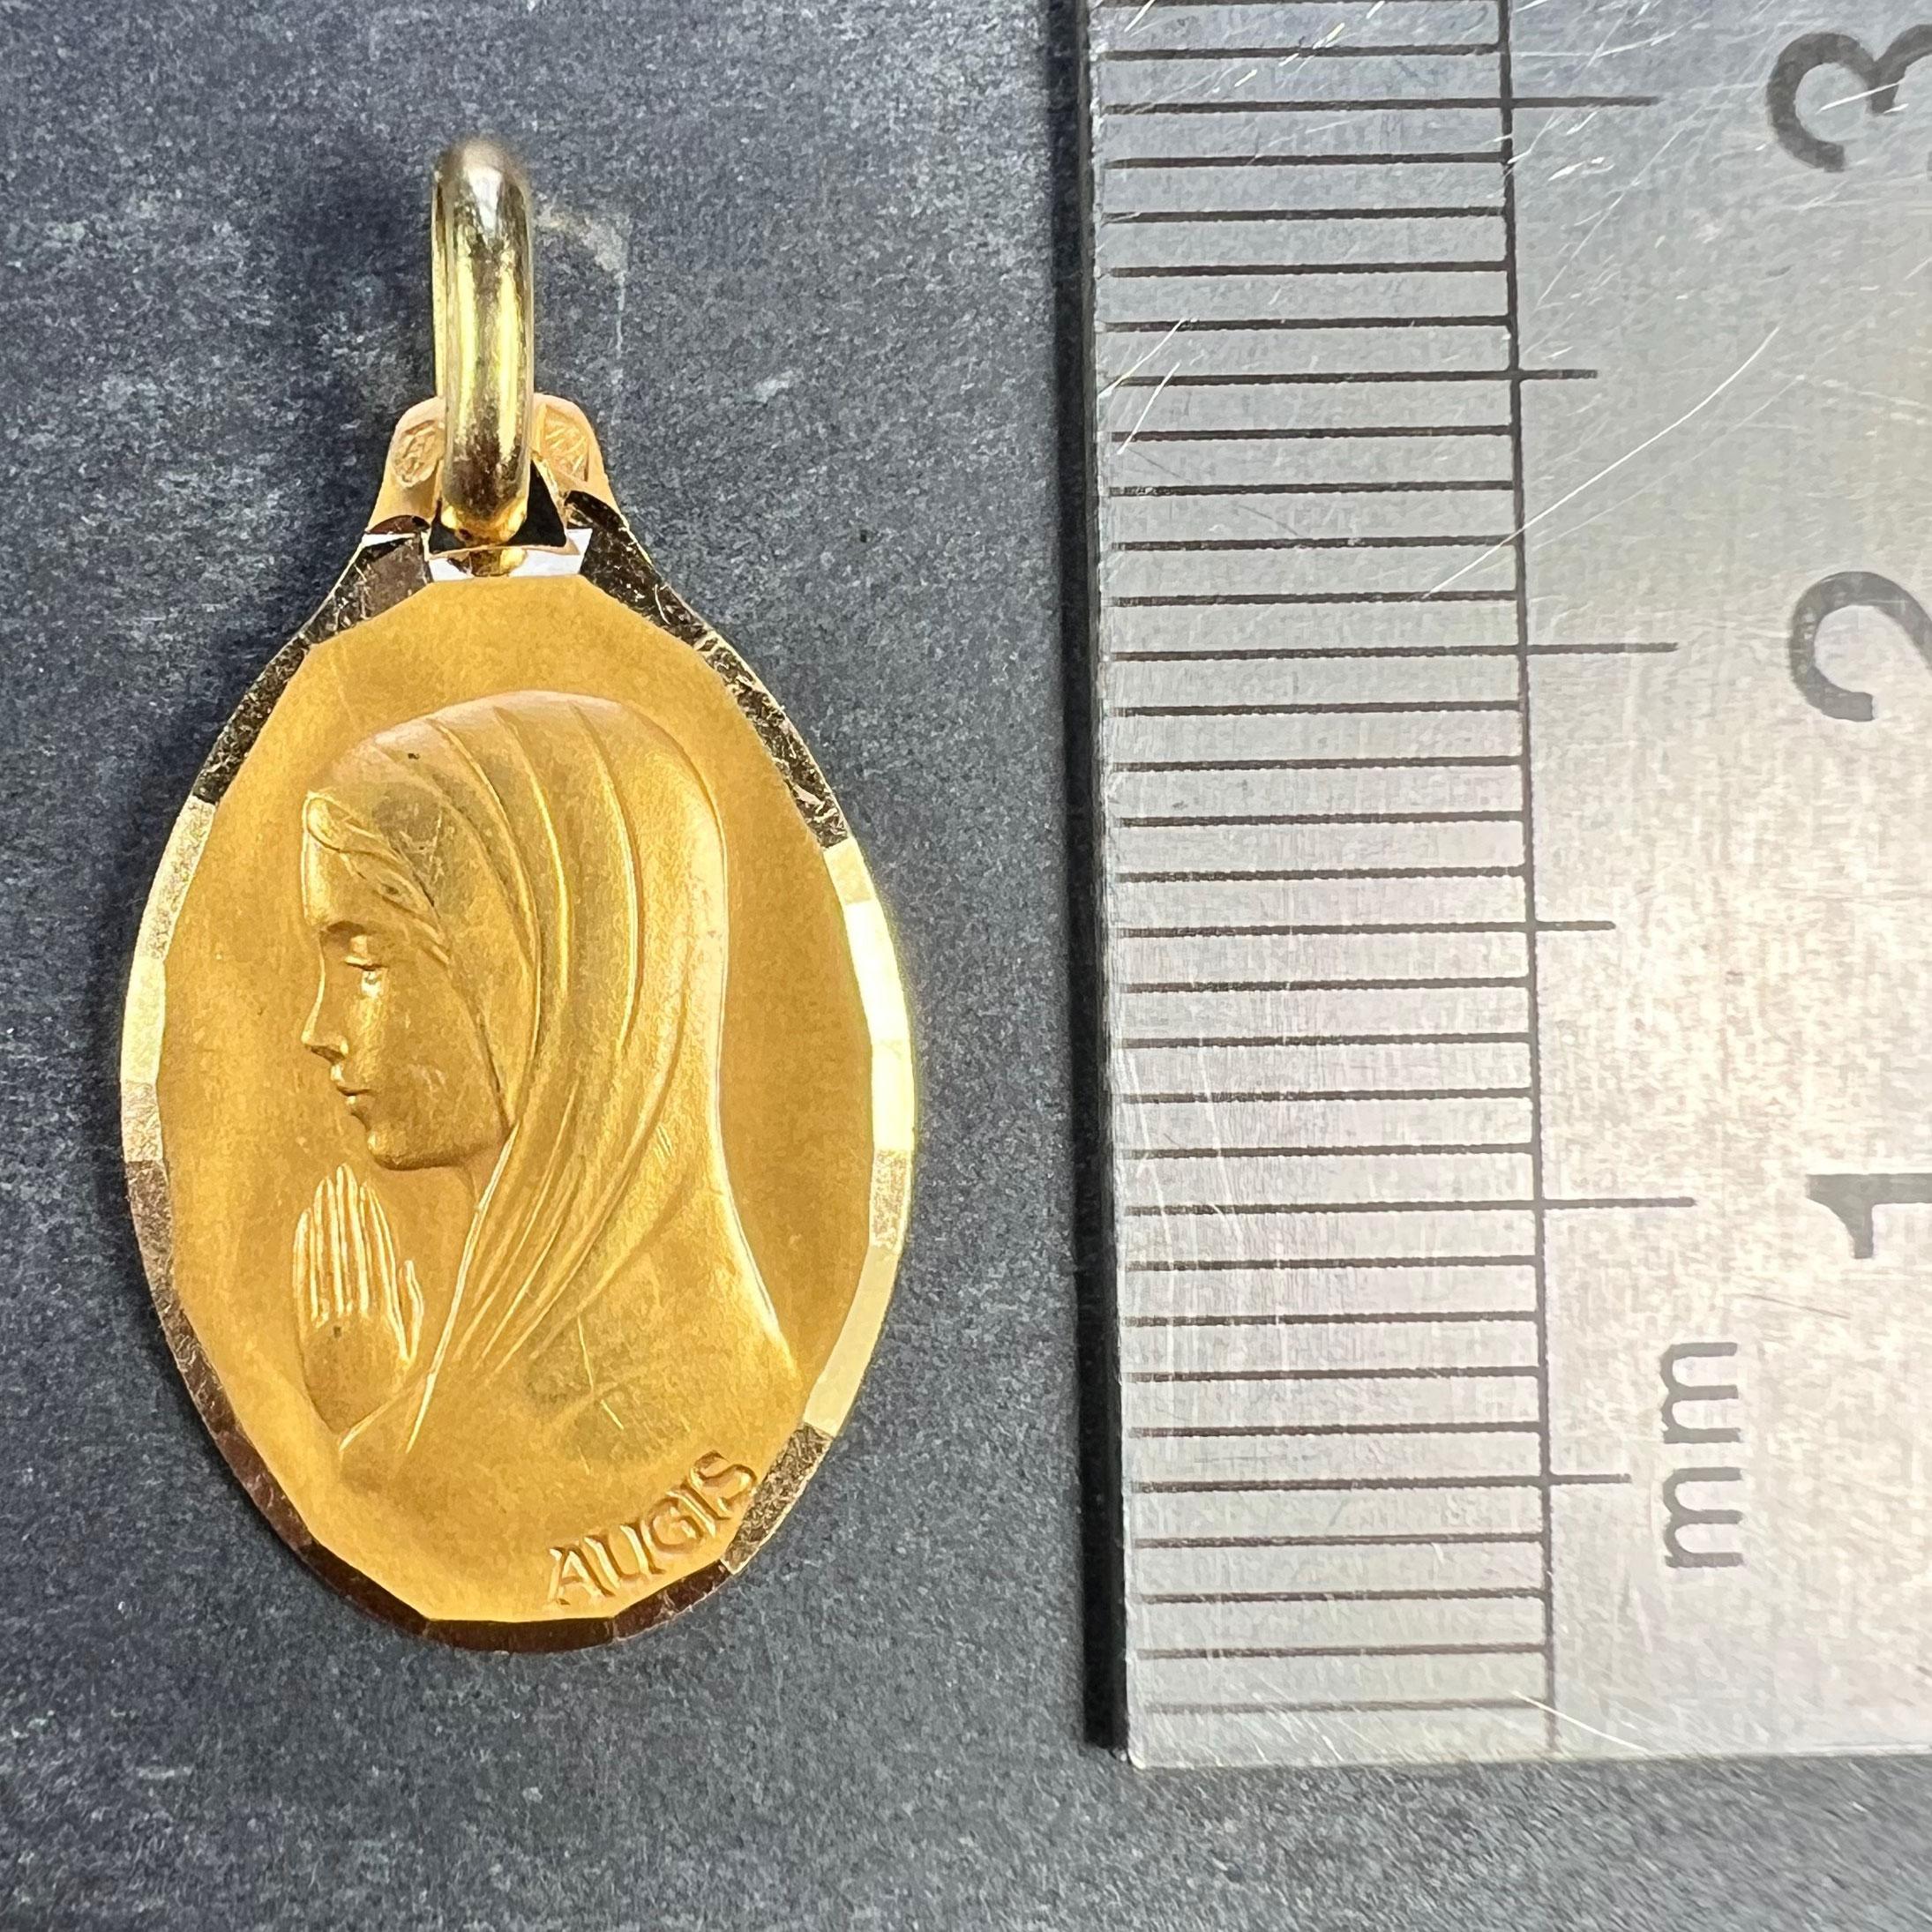 French Augis Virgin Mary 18K Yellow Gold Medal Pendant For Sale 5